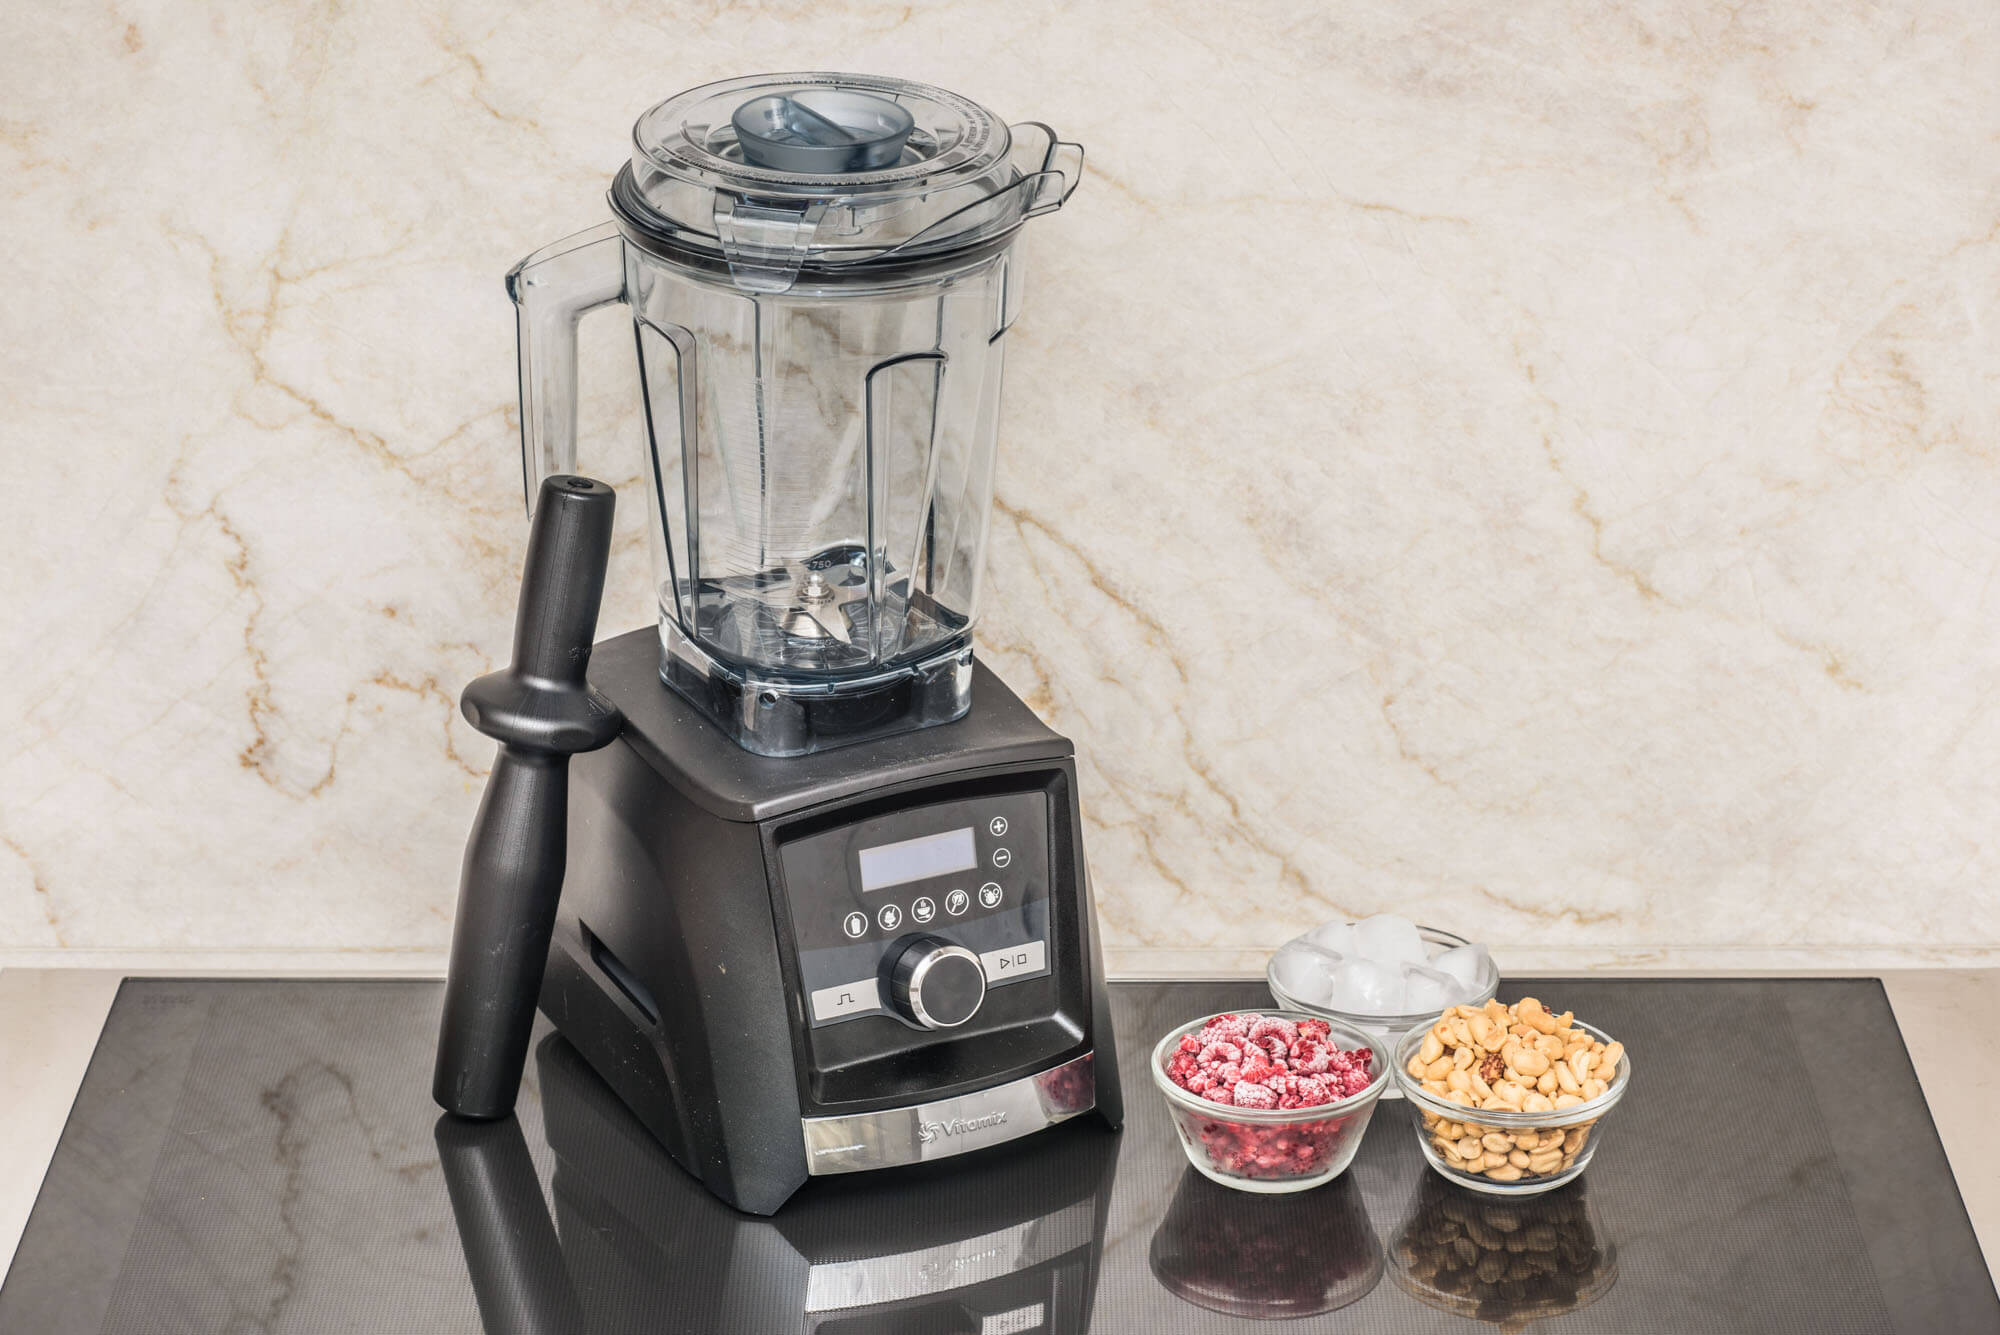 Fontanero Fiesta Perspicaz The 9 Best Blenders of 2023 - Reviews by Your Best Digs